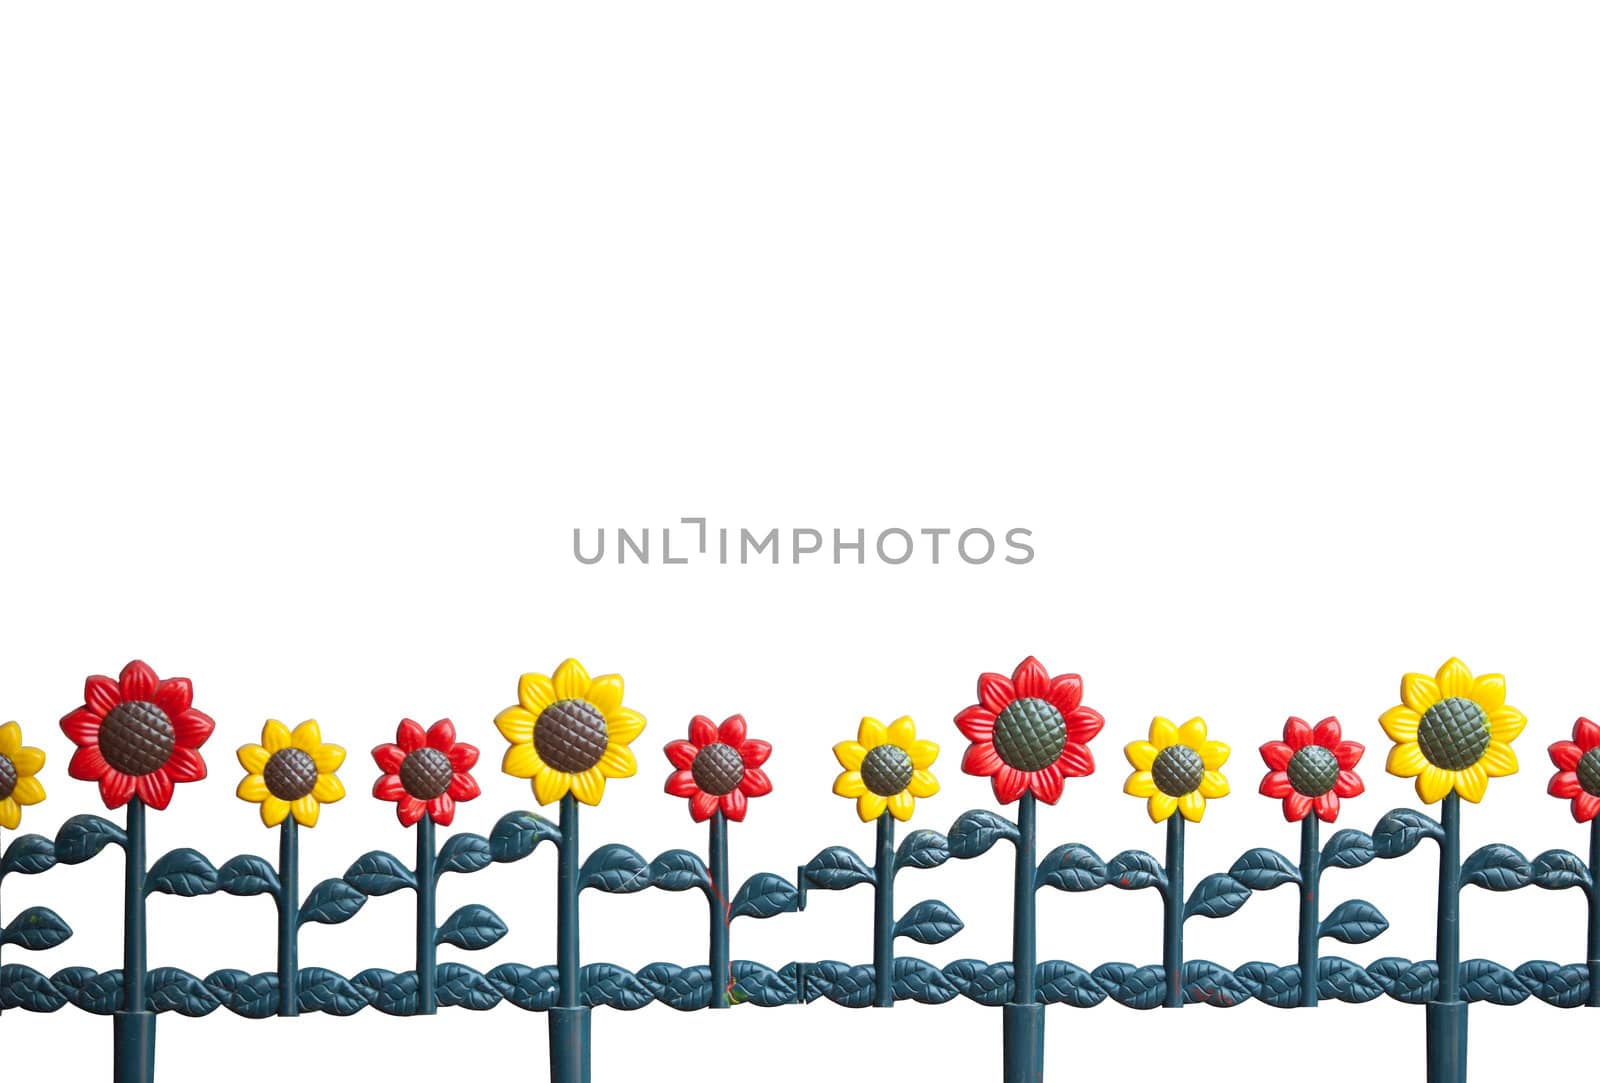 Isolate fence of metal flower by Suriyaphoto